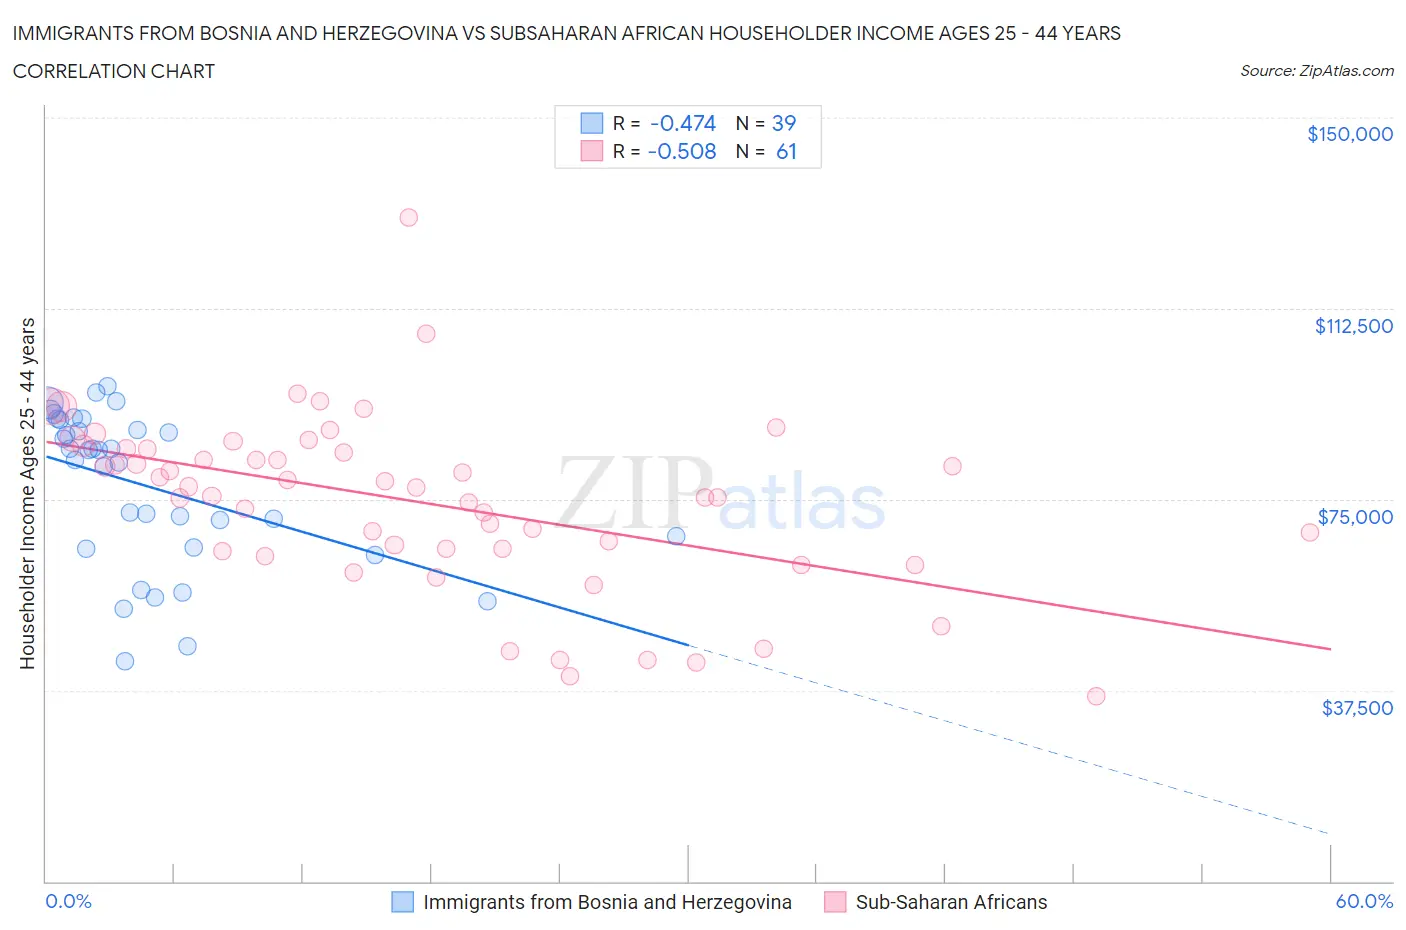 Immigrants from Bosnia and Herzegovina vs Subsaharan African Householder Income Ages 25 - 44 years